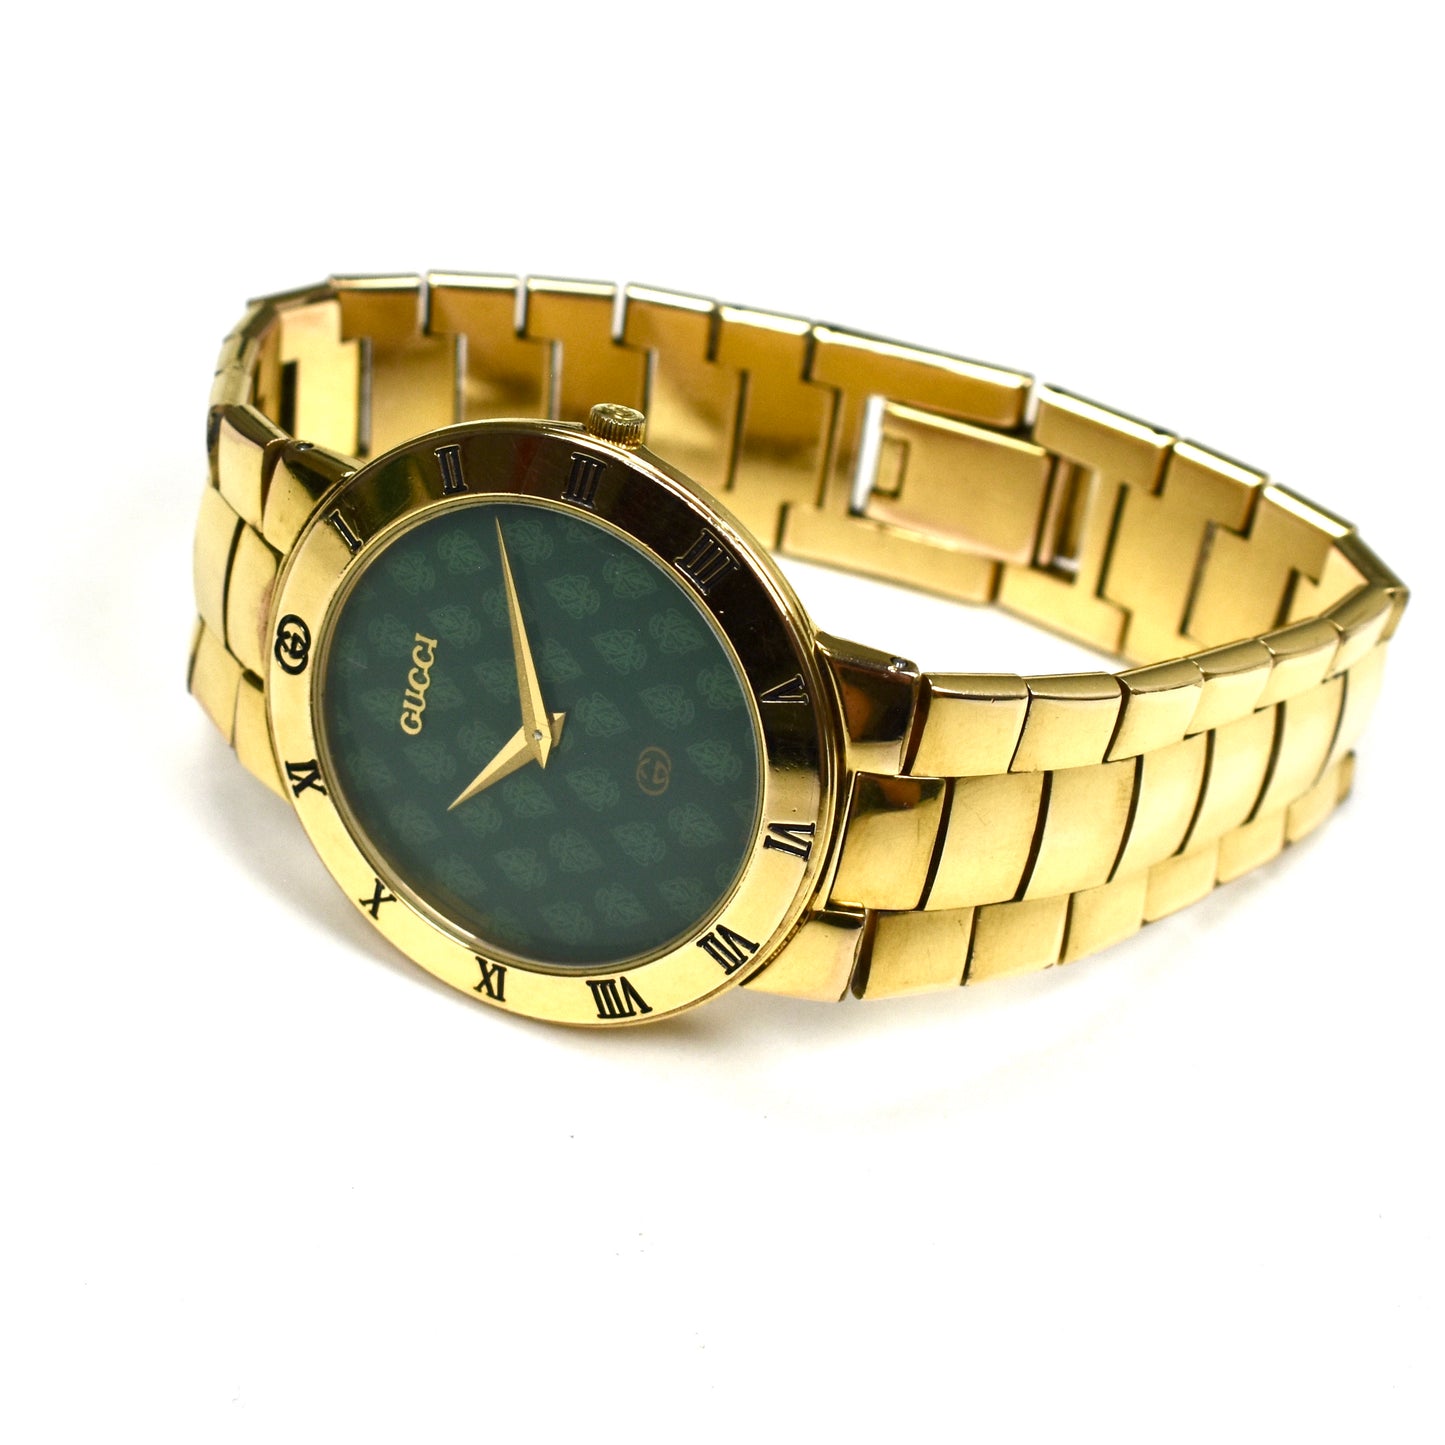 Gucci - 3300M Gold / Green Crest Dial Watch